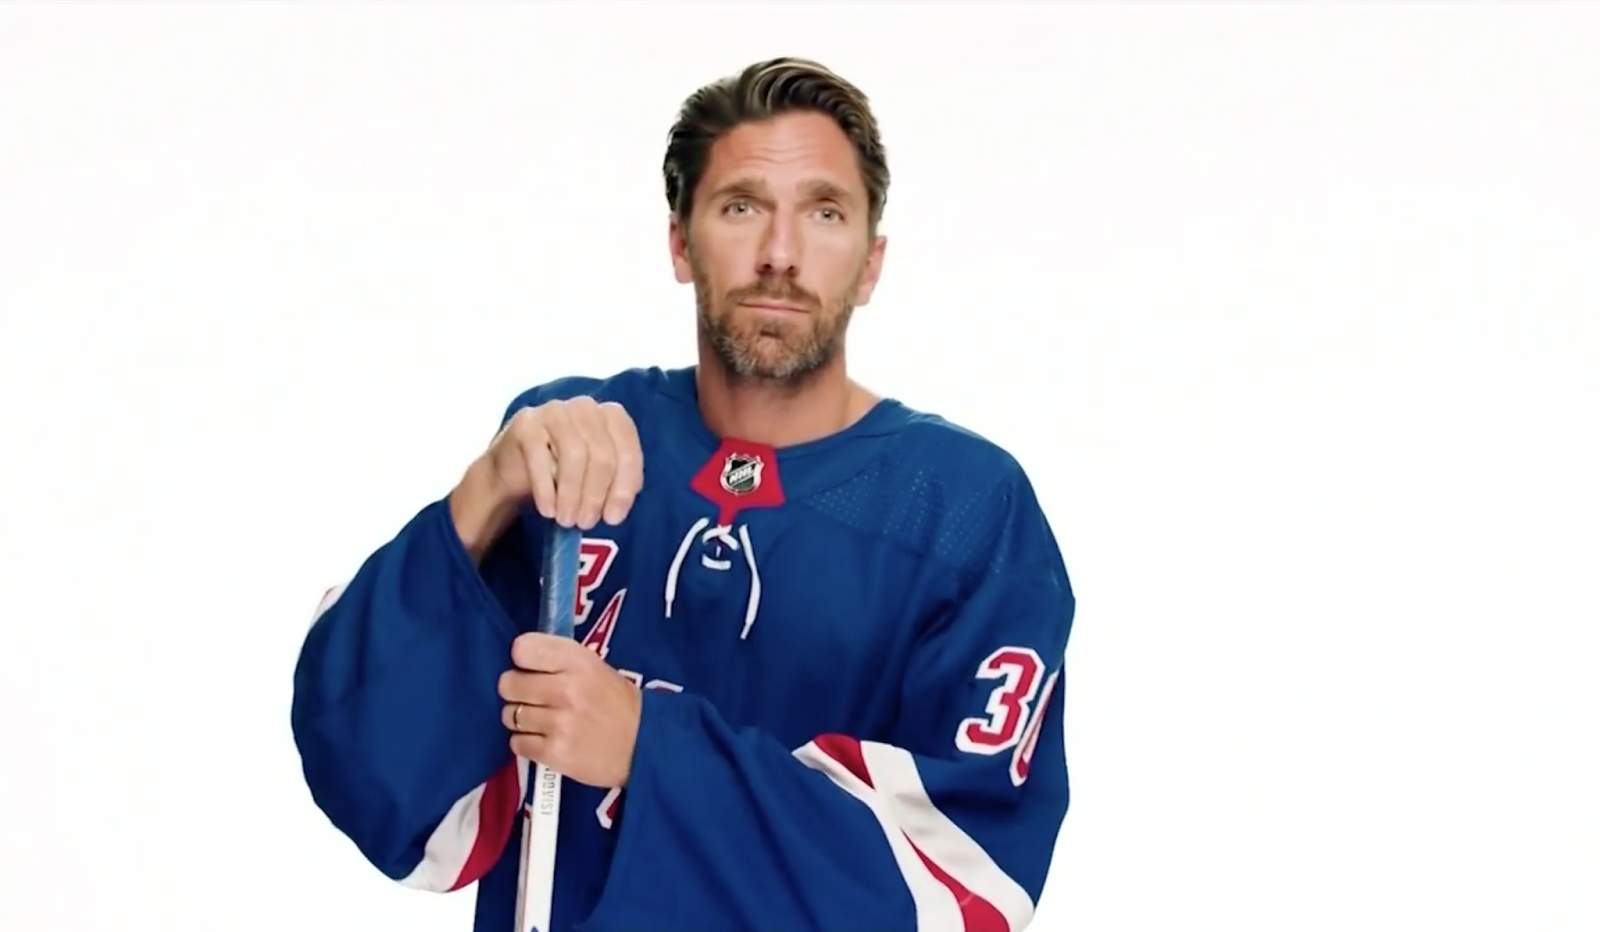 Capitals sign Henrik Lundqvist to one-year, $1.5 million contract #hank2dc